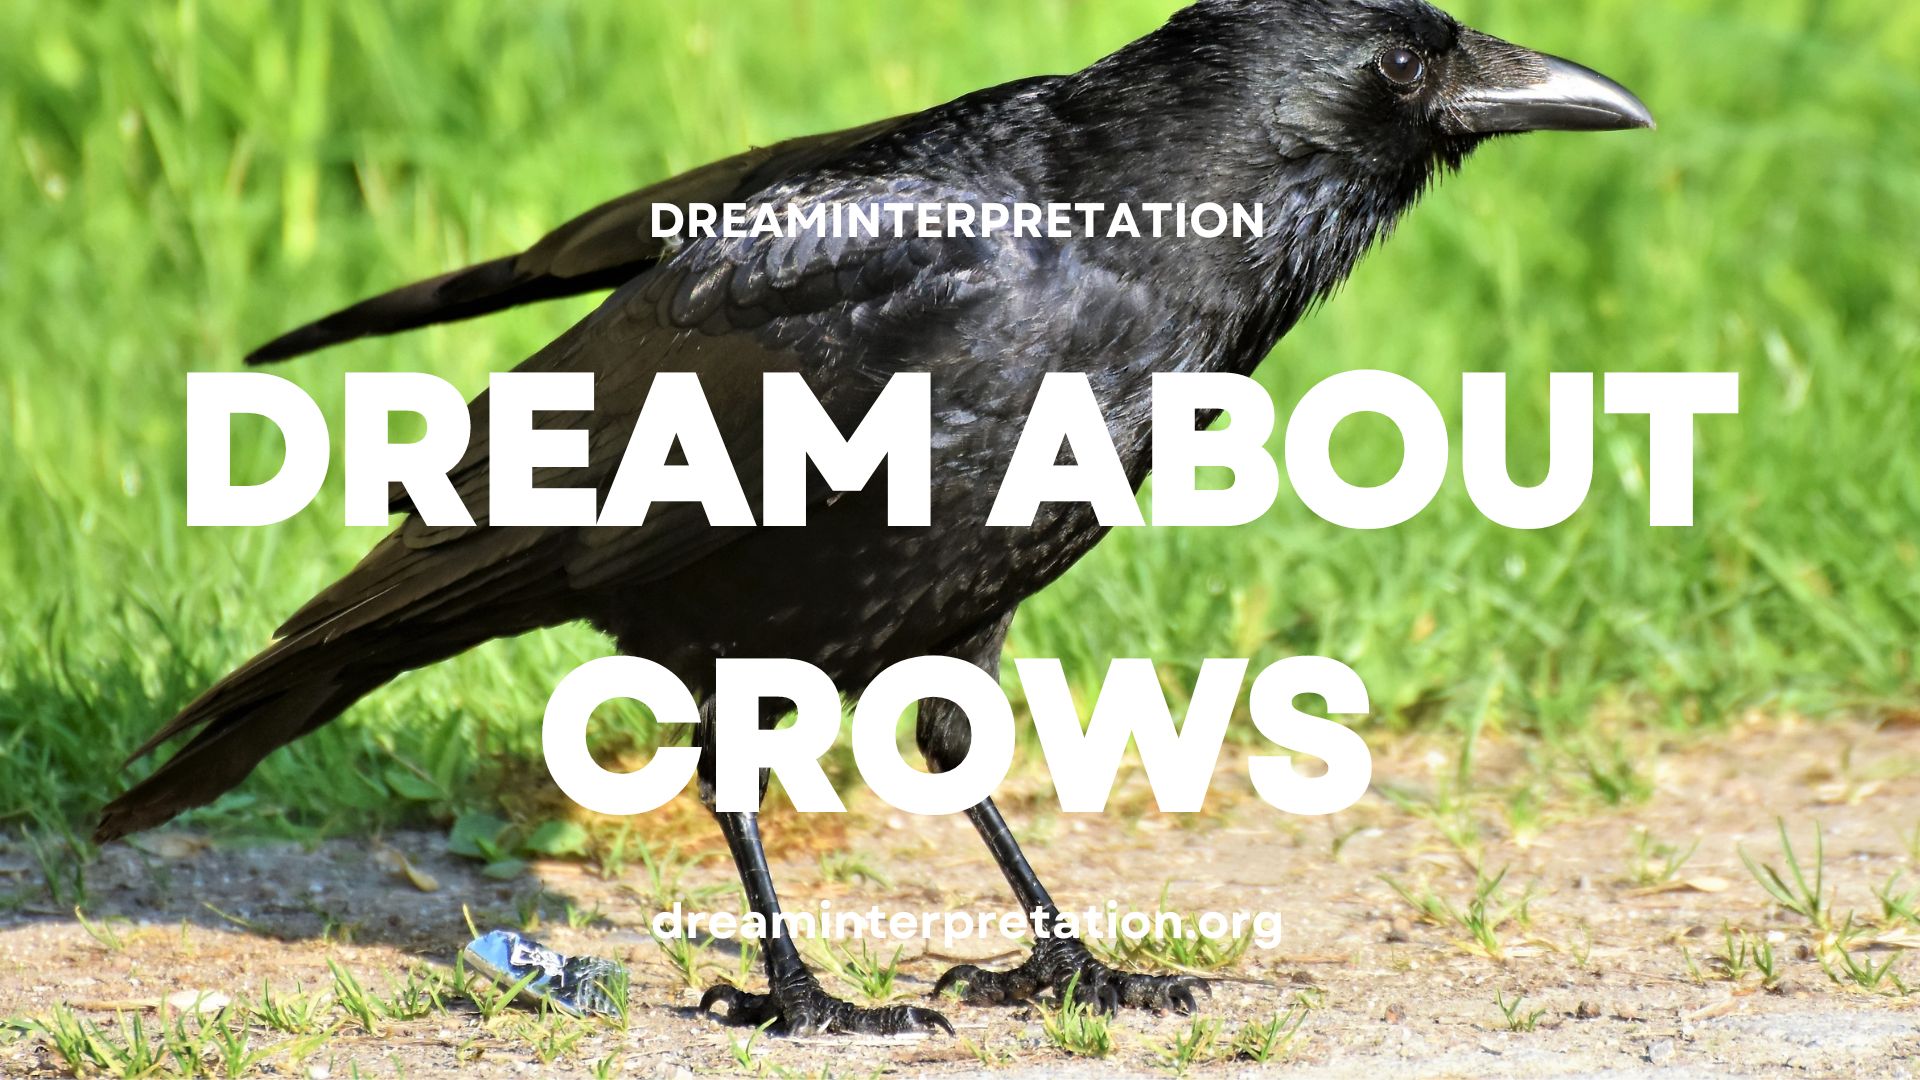 Dream About Crows?